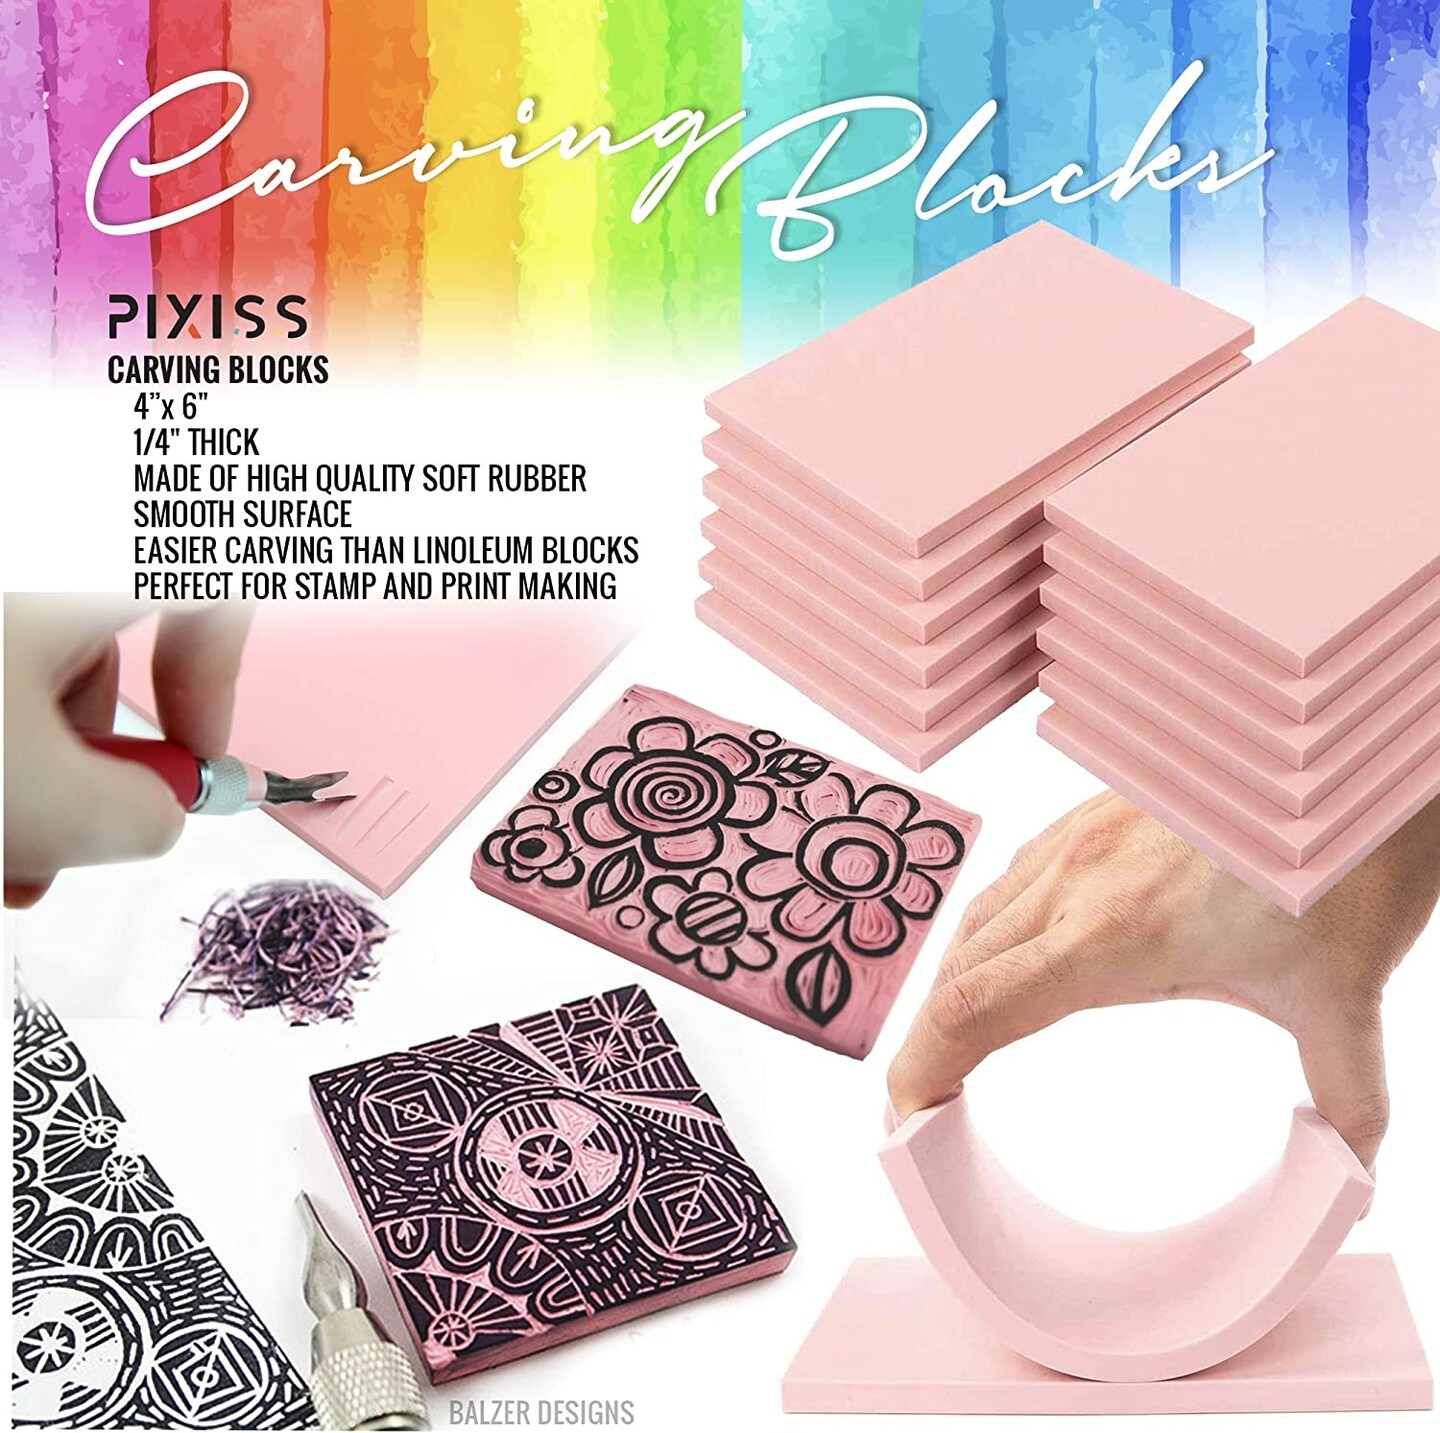  Rubber Stamp Carving Kit Carving Rubber Stamp Tool Kit Rubber  Stamp Carving Handcraft Set Rubber Stamp Making Kit for Beginners, DIY  Project : Arts, Crafts & Sewing